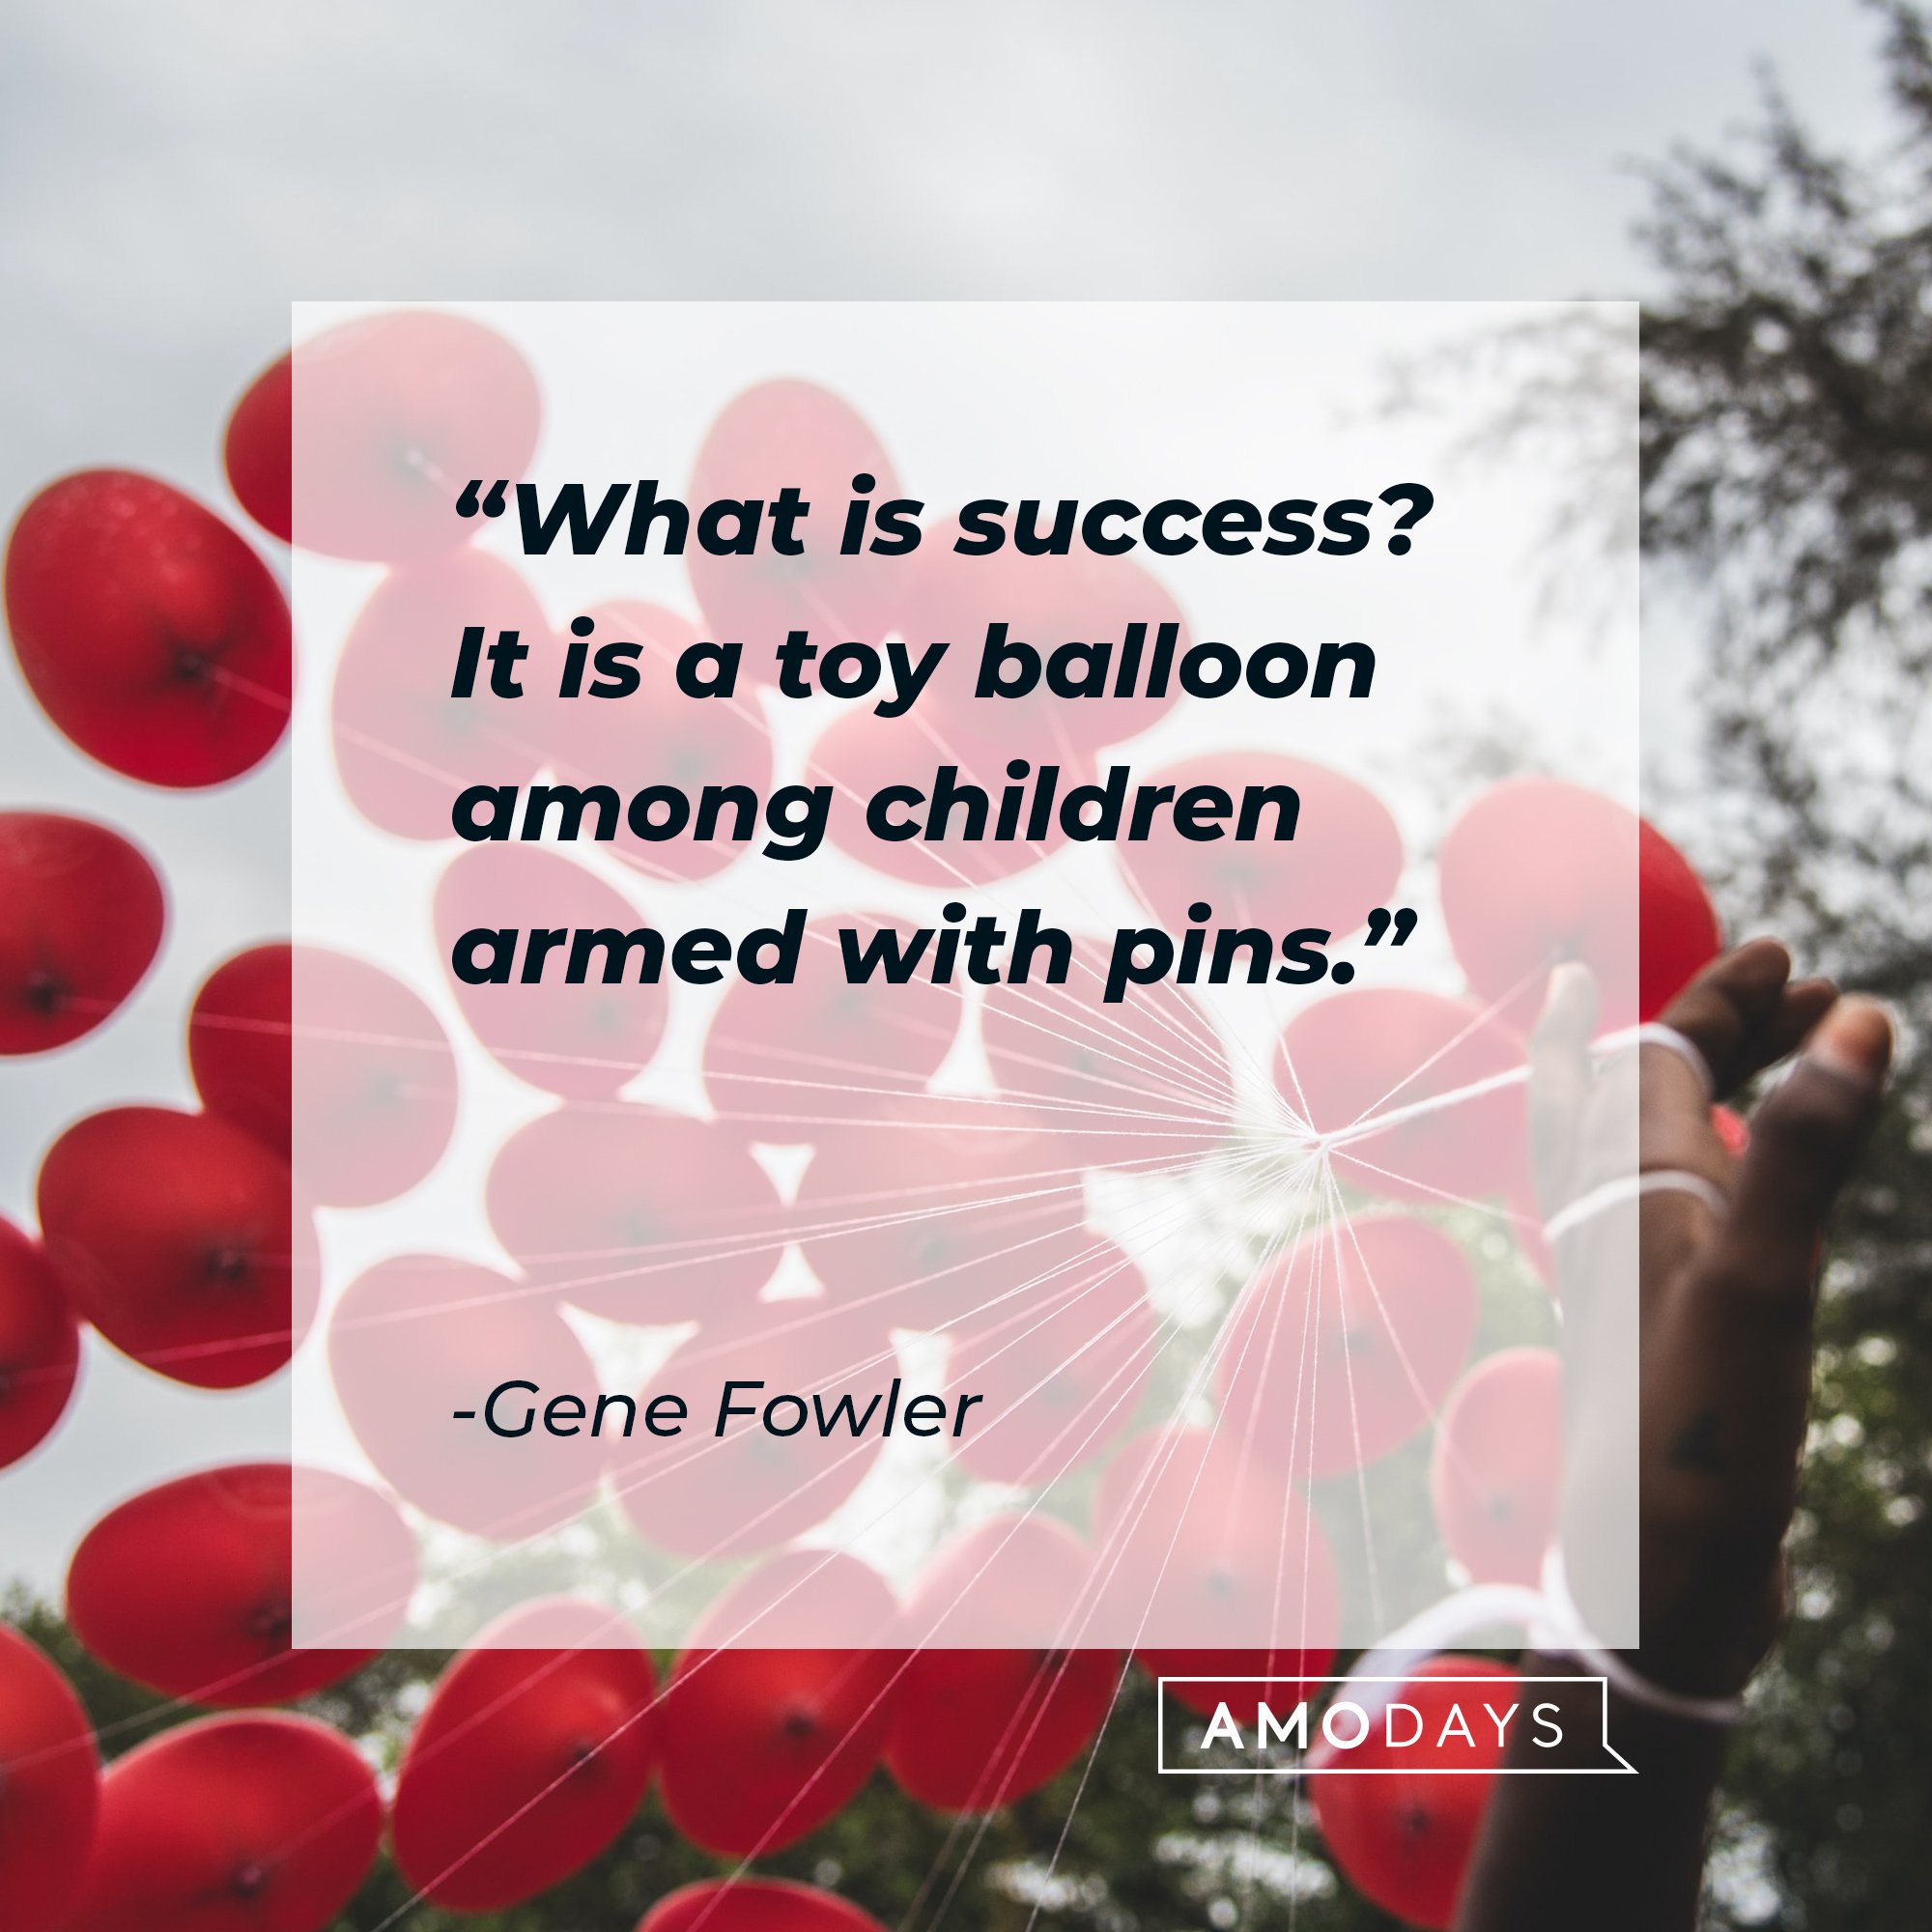 Gene Fowler’s quote: "What is success? It is a toy balloon among children armed with pins." | Image: AmoDays 